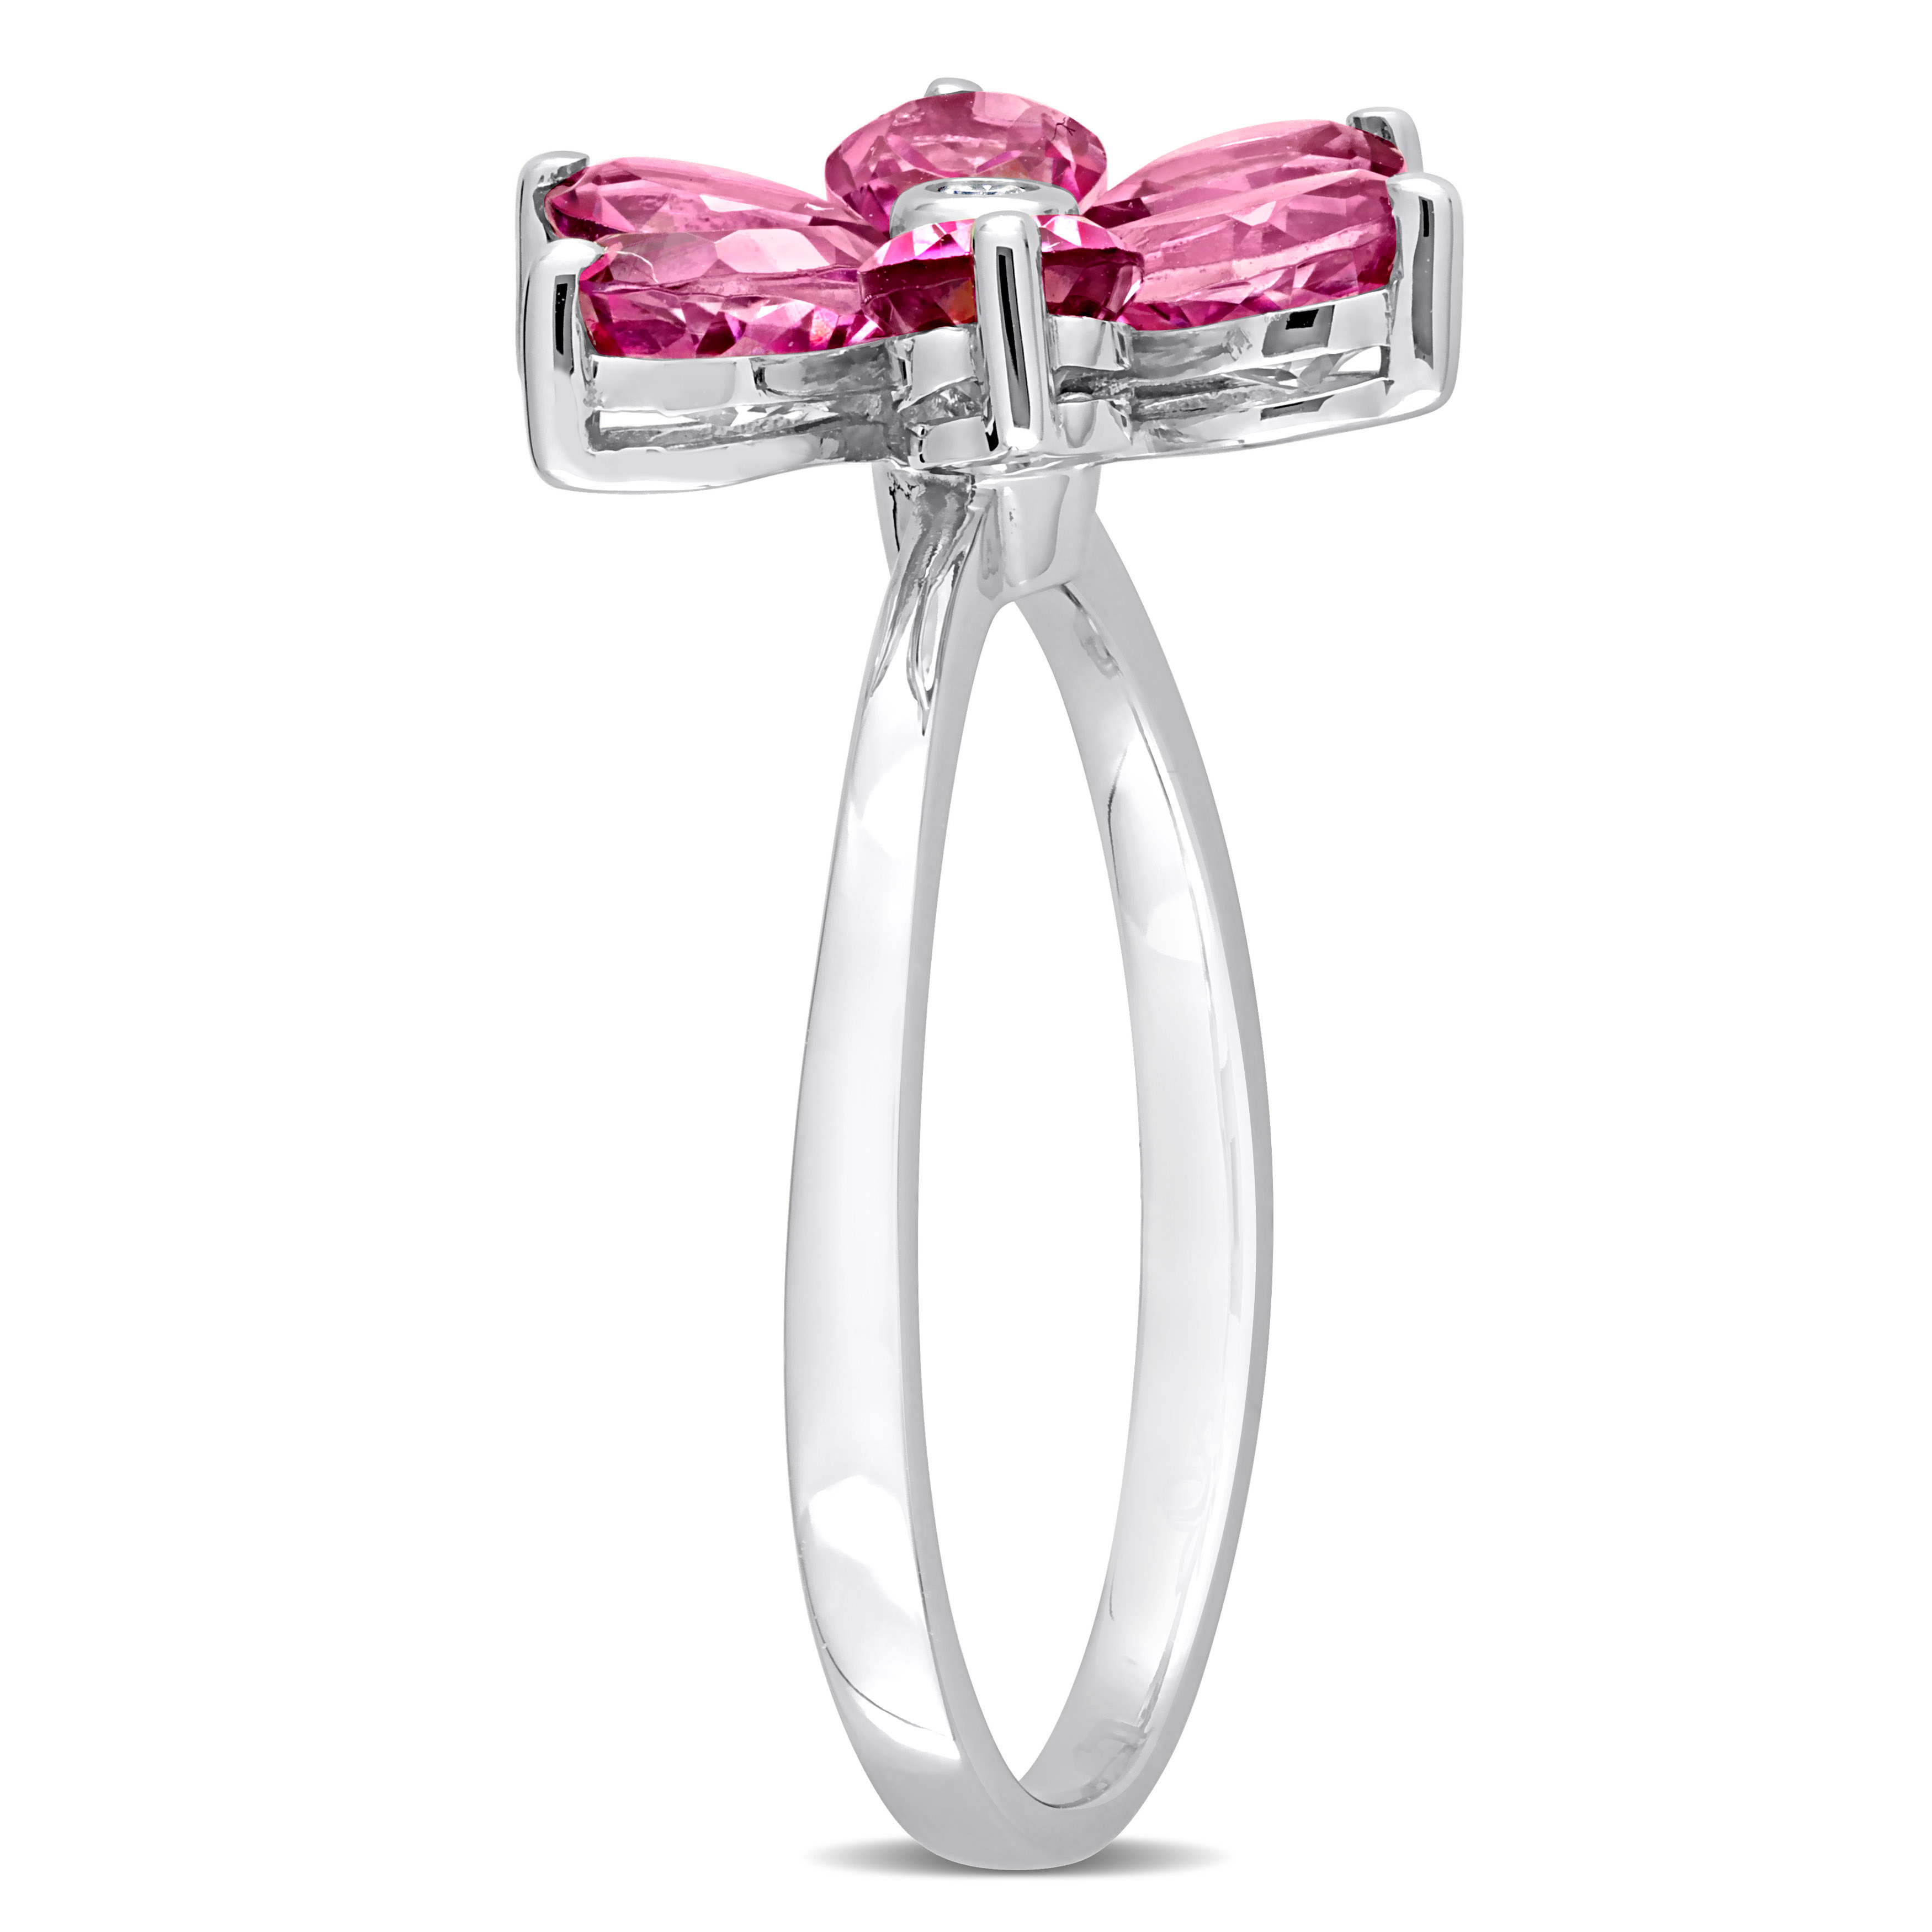 2 4/5 CT TGW Pear Shape Pink Topaz and Diamond Accent Floral Ring in 10k White Gold